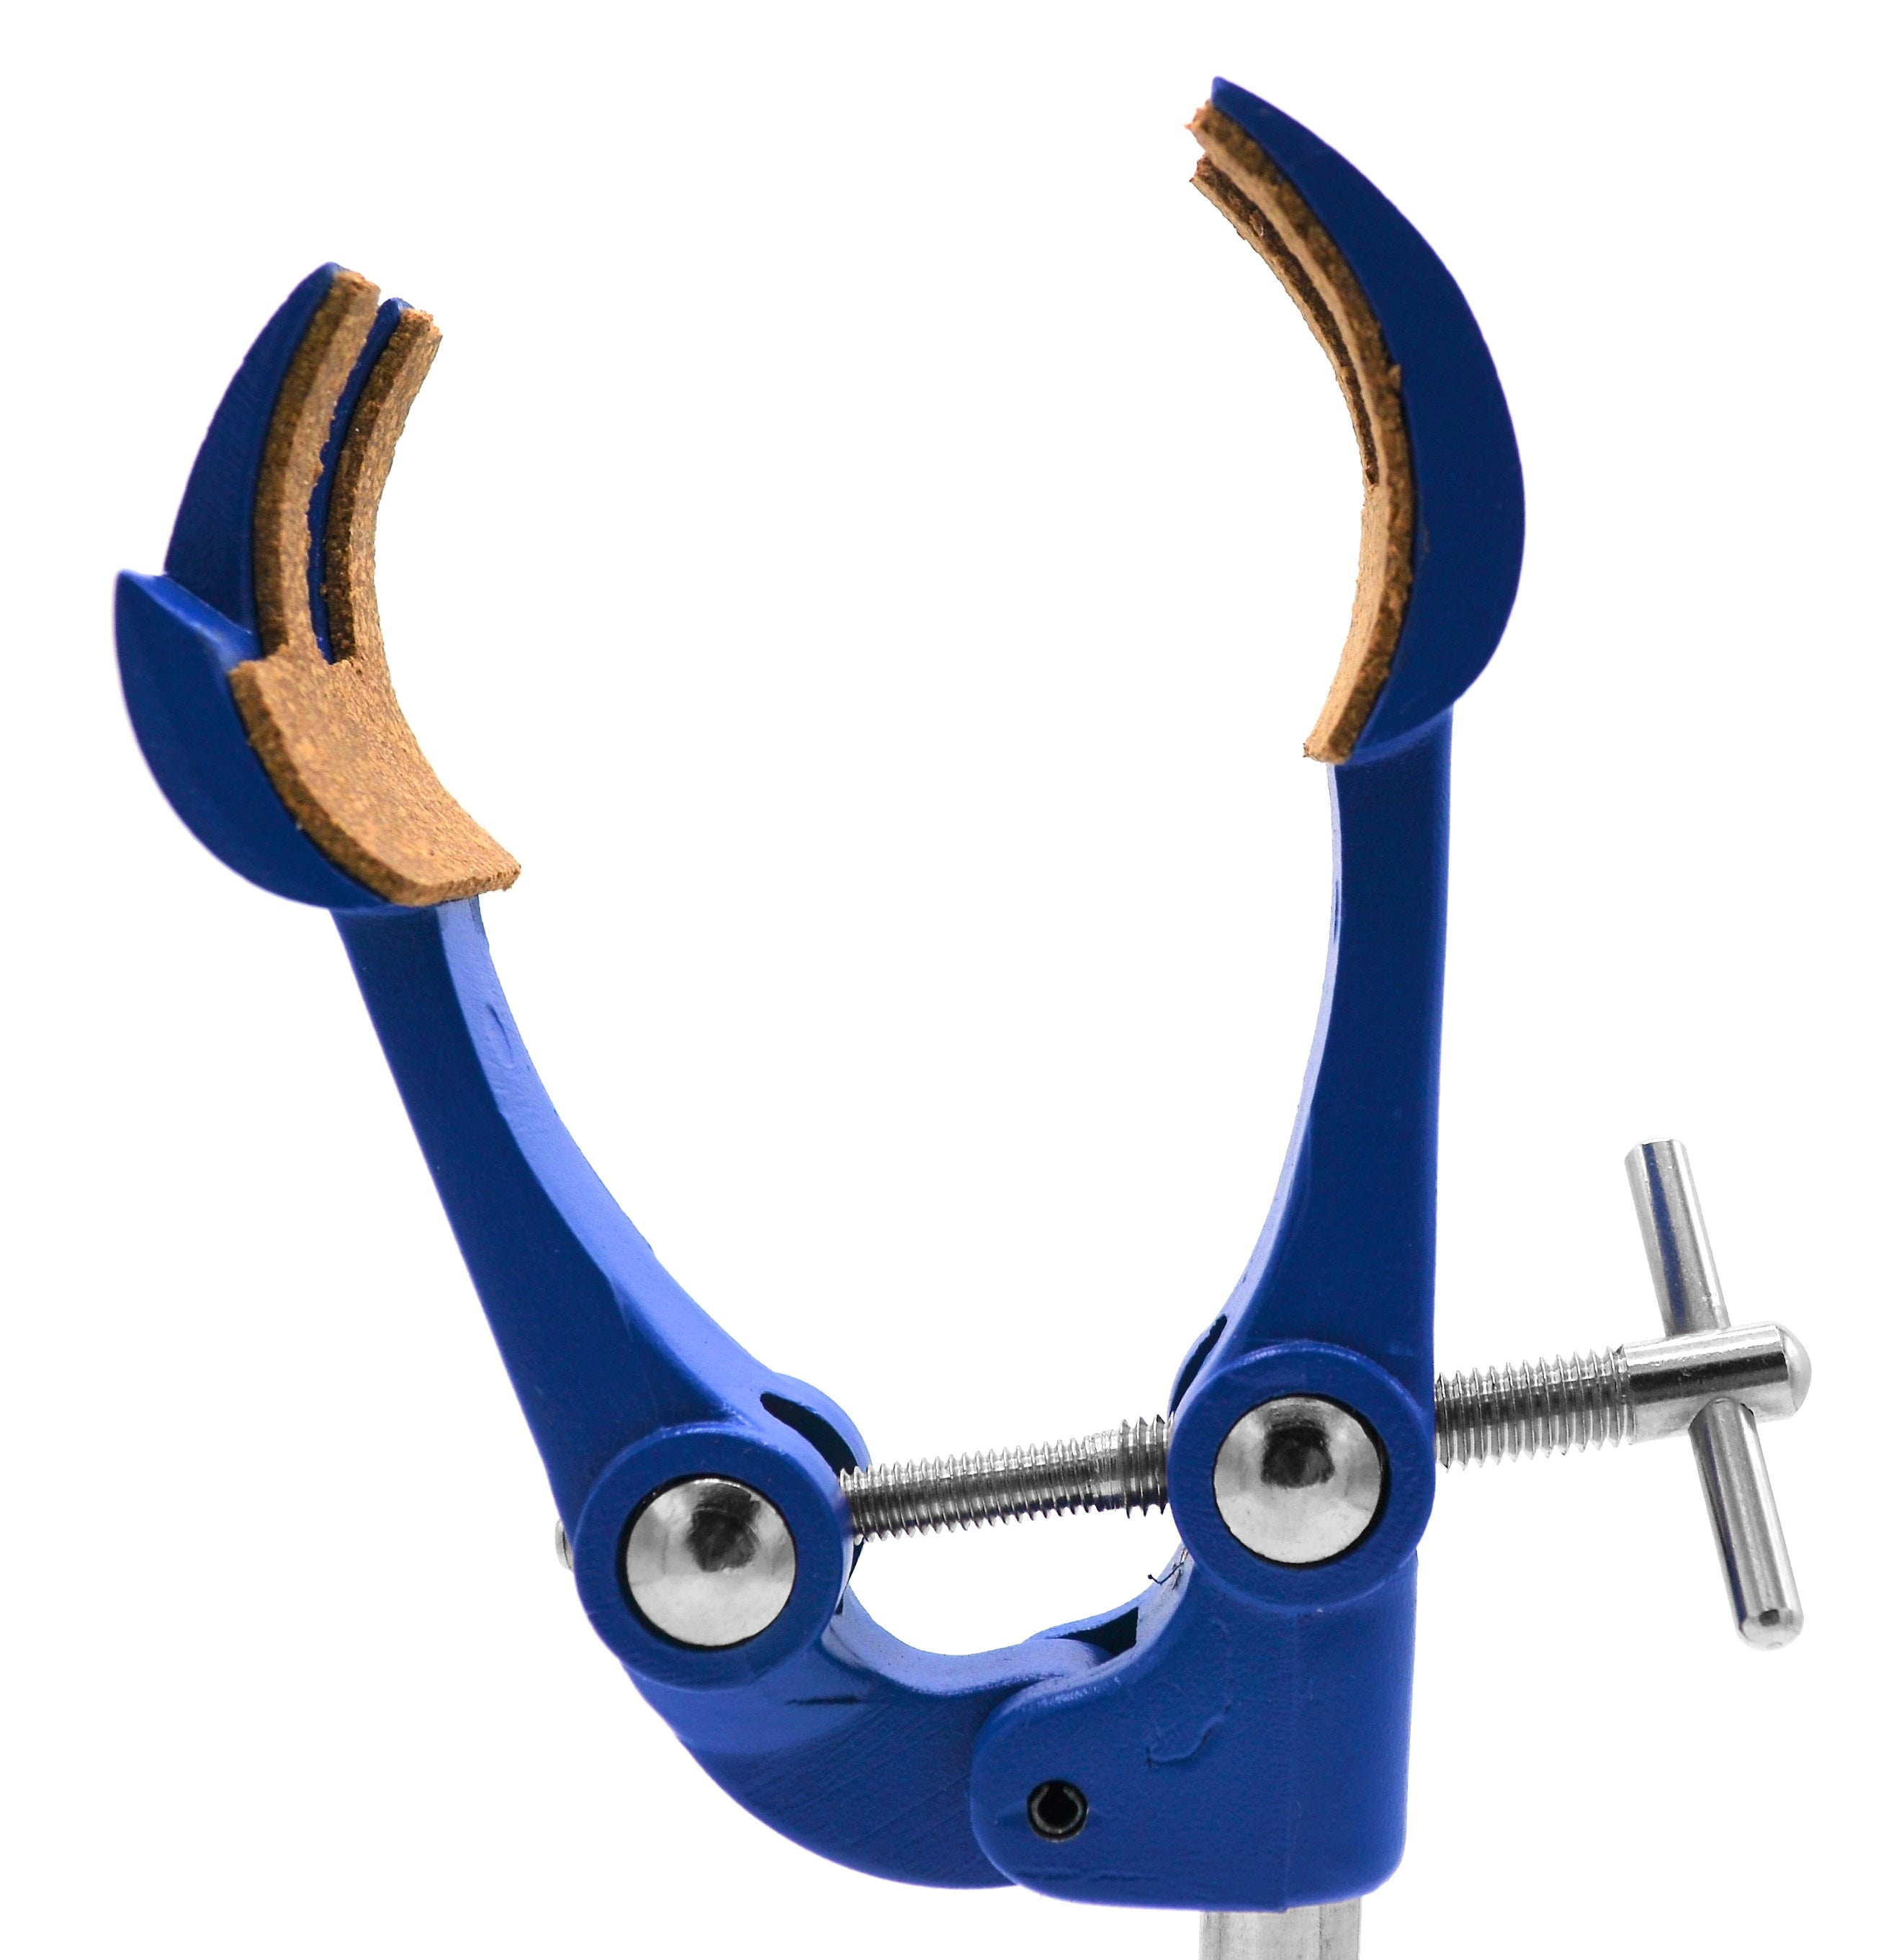 4 Finger Pronged, Cork Lined, Lab Clamp with Boss Head, 4.25" (10.8 cm) maximum clamp opening